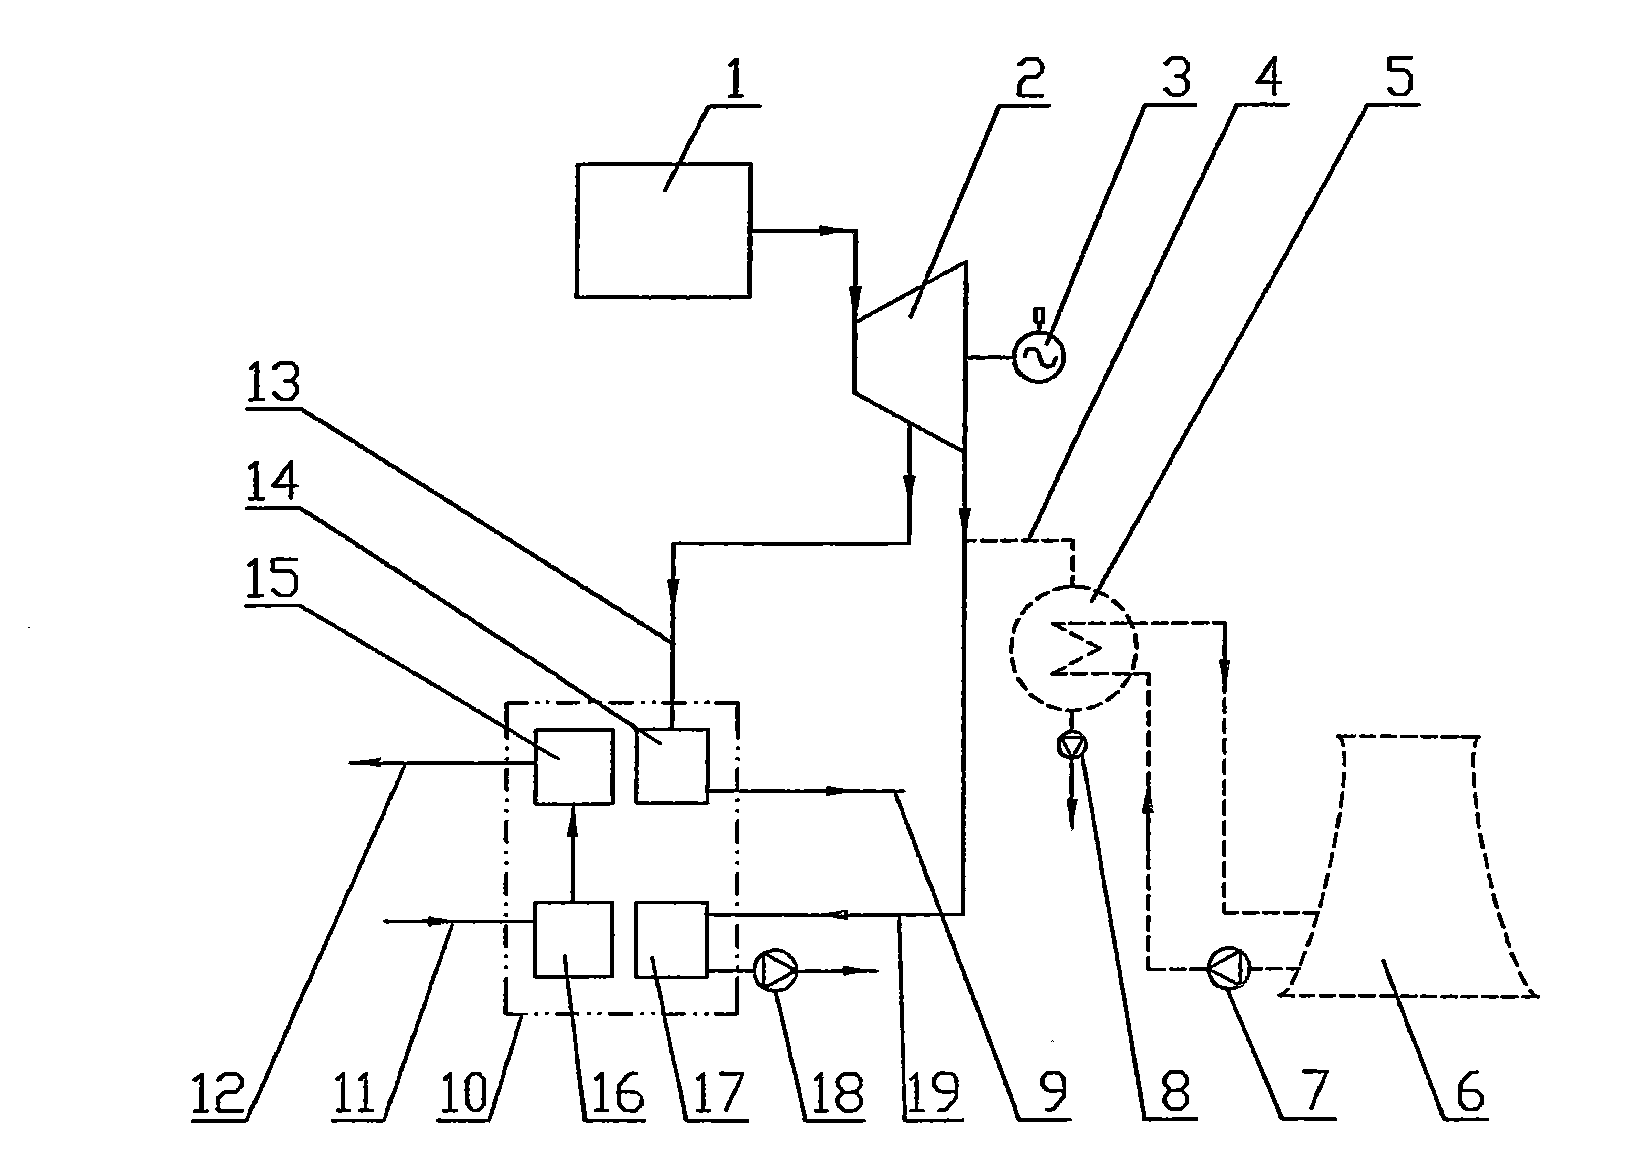 Combined heat and power system for directly recovering exhaust afterheat of power station steam turbine by absorption heat pump